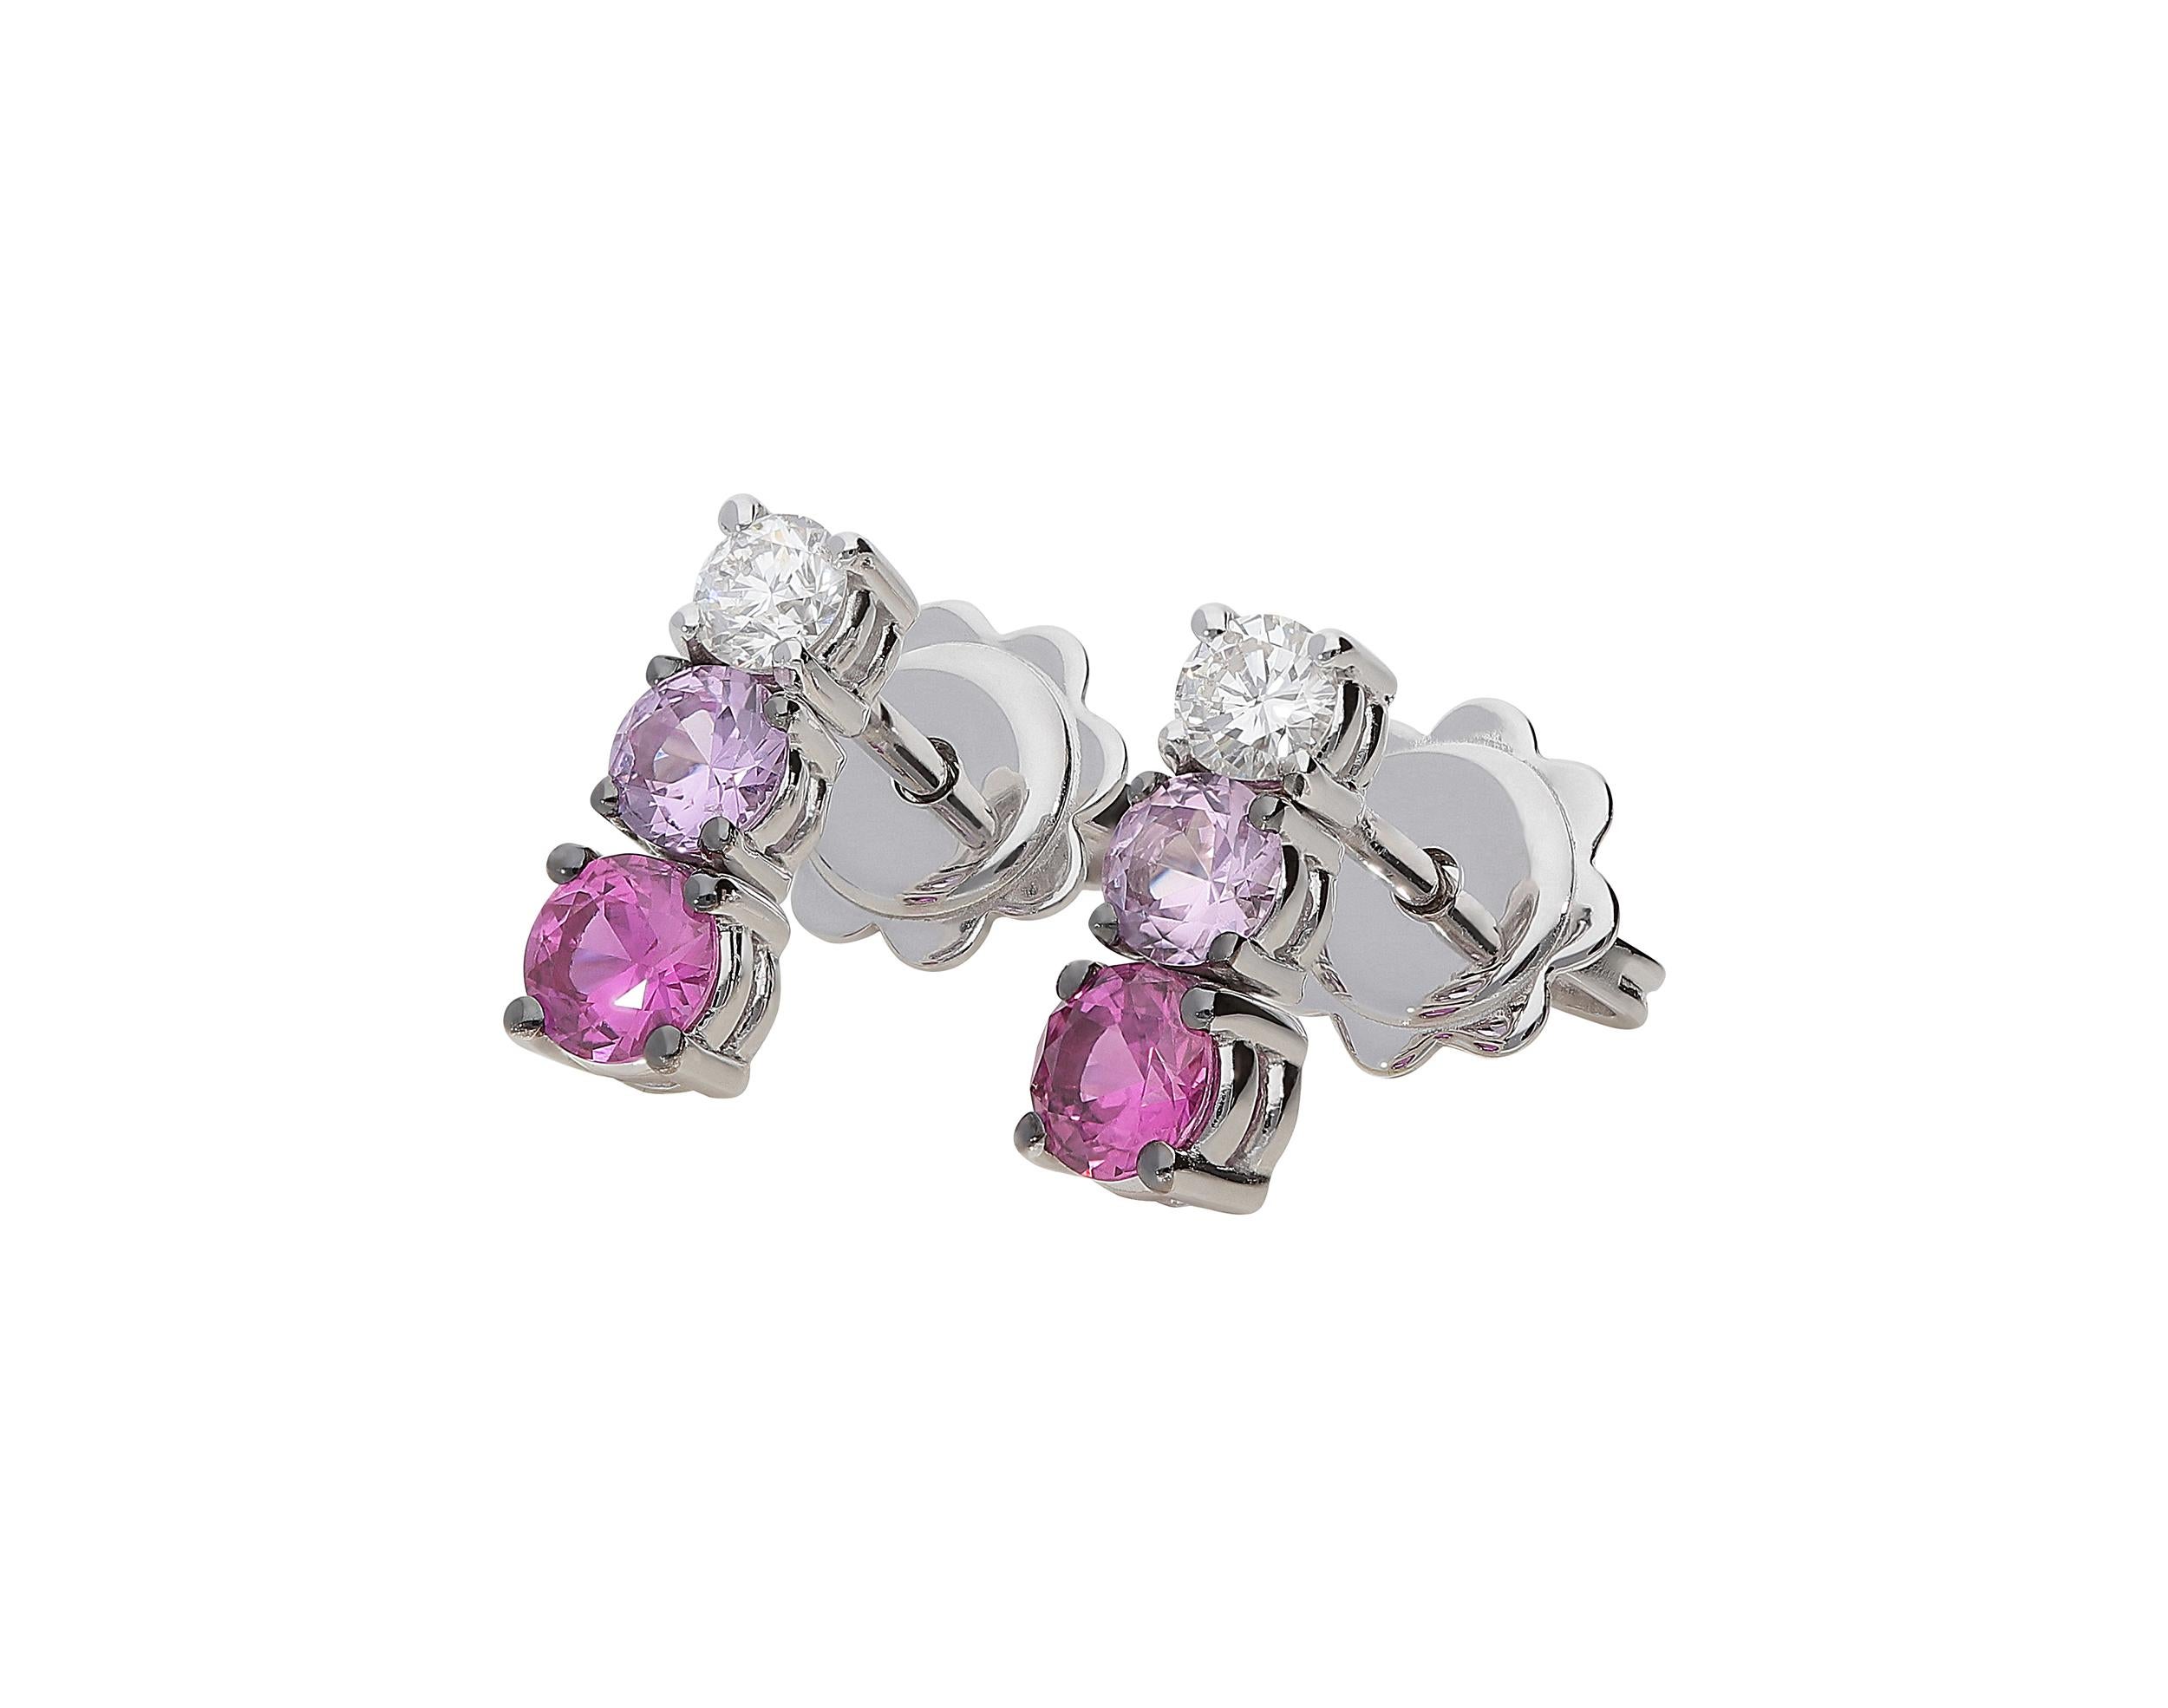 Colorful short tennis earrings in 18kt white gold for 2.60 grams, 0,21 carats of white round brilliant GVS diamonds, 0,51 round brilliant rubies and 0,38 round brilliant pink sapphires.
Its sophistication consists in the graduation of colors from